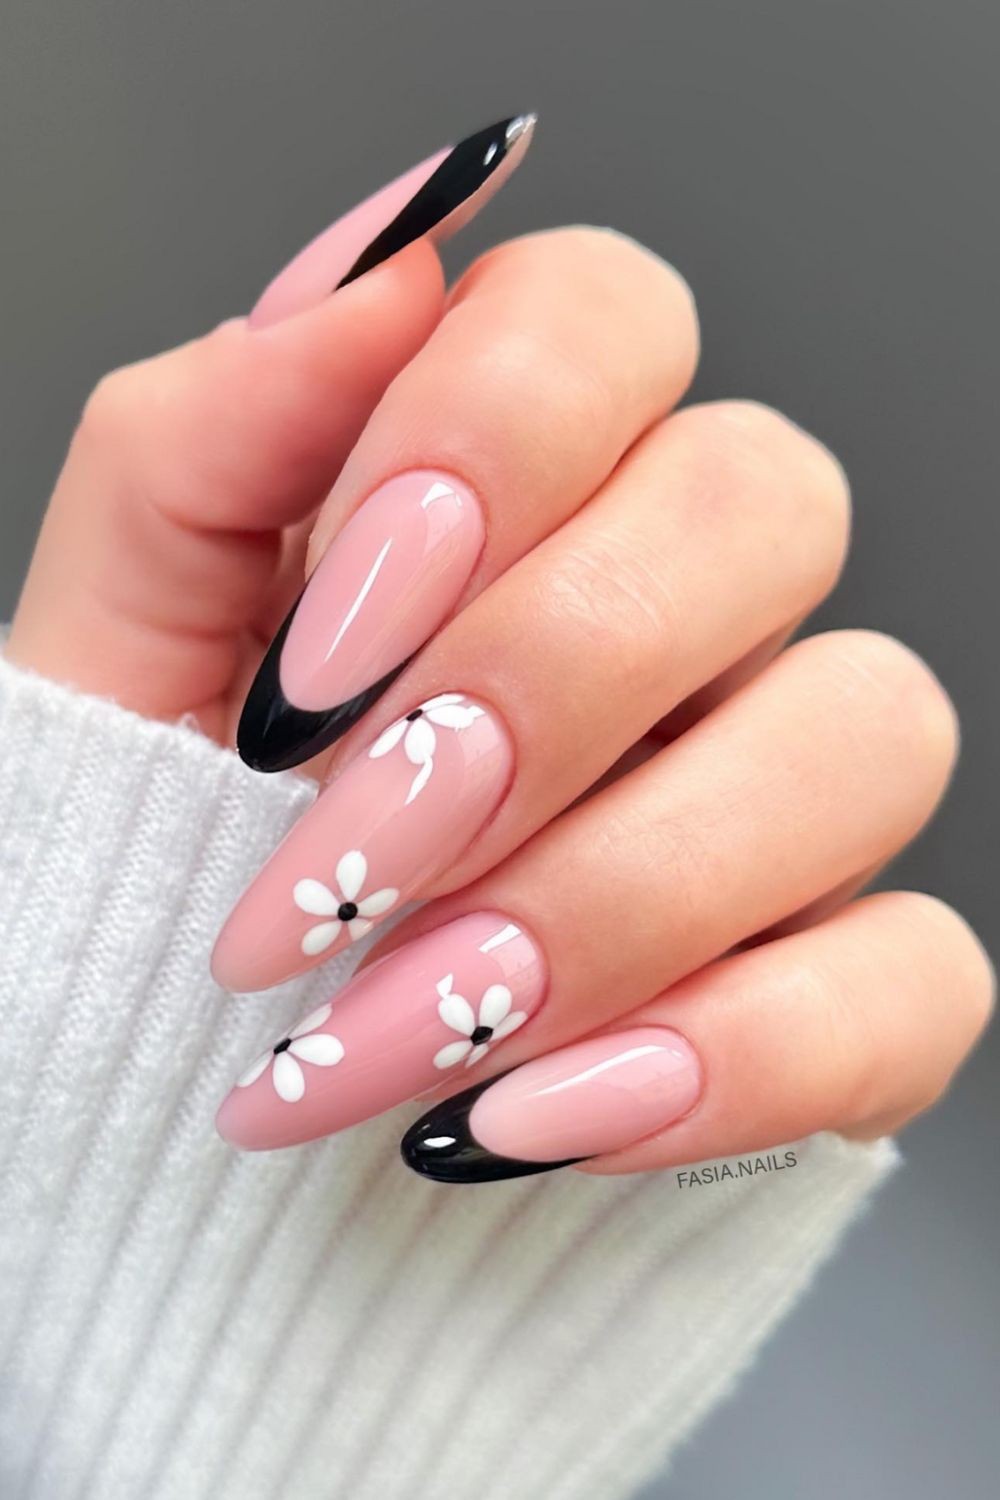 Pink and Black French Tips with Floral Accents